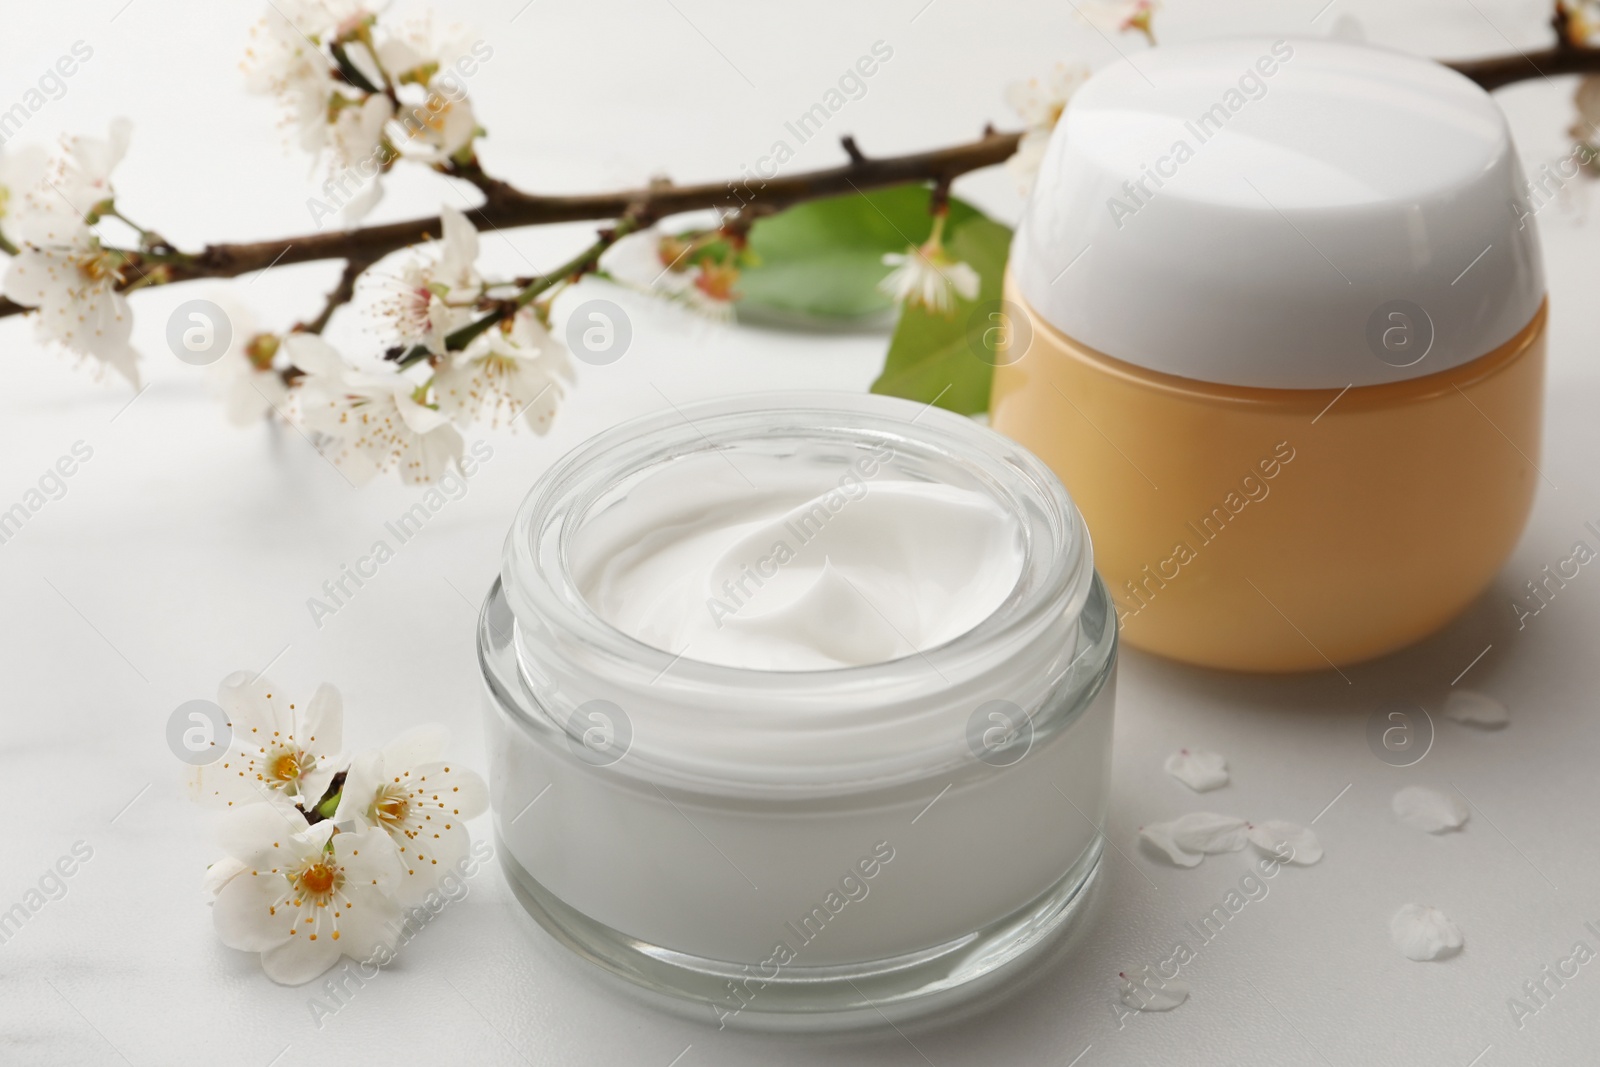 Photo of Jars of face cream, leaves, tree branch and flowers on white marble table